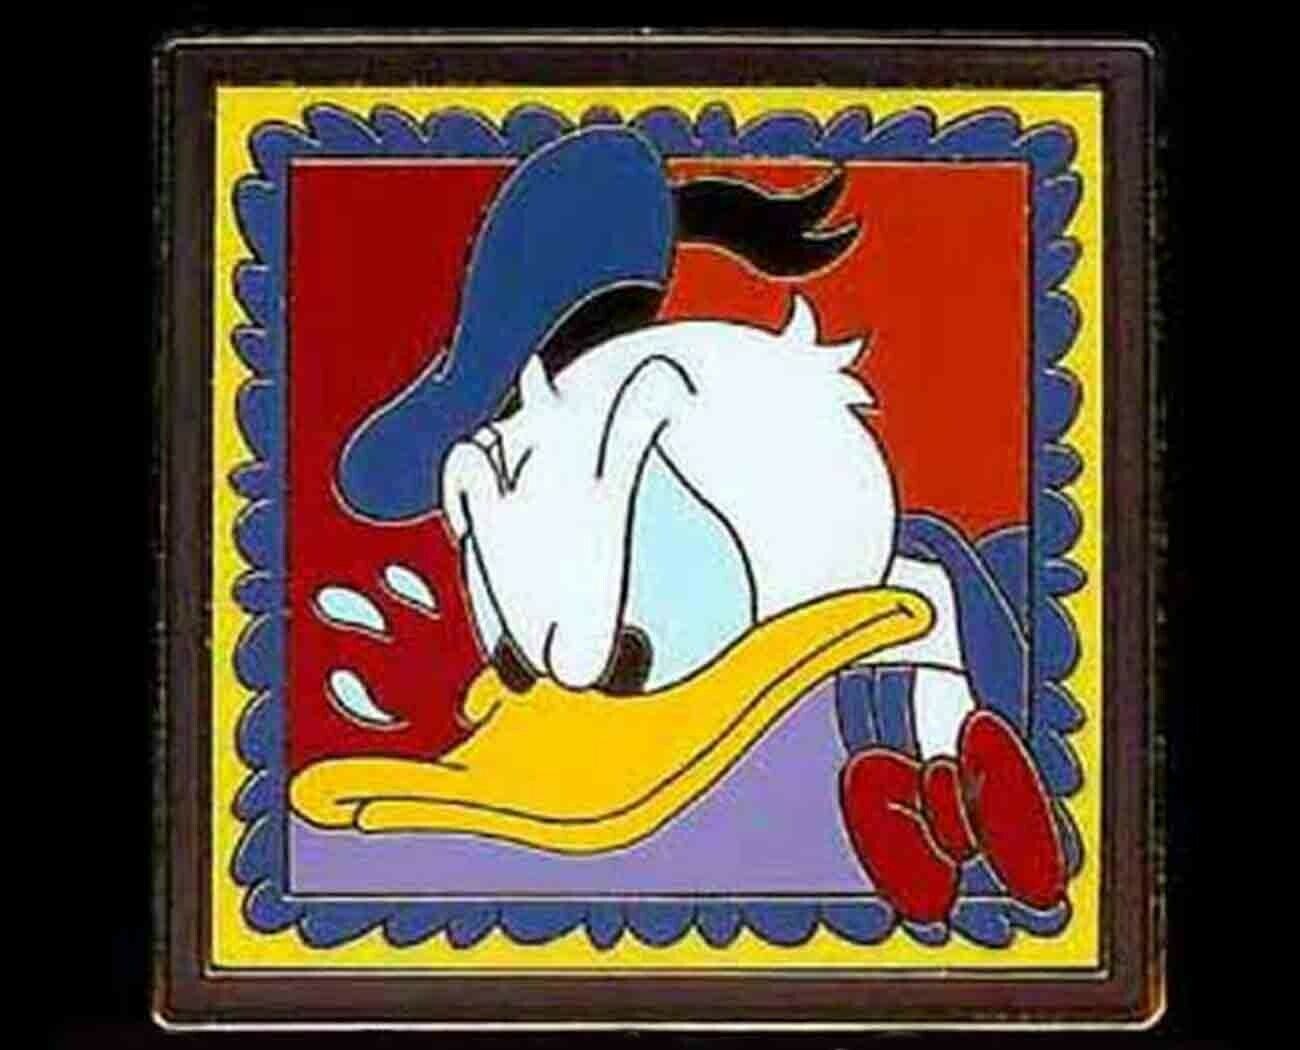 Donald Duck - Angry Framed Square Stamp Disney Pin